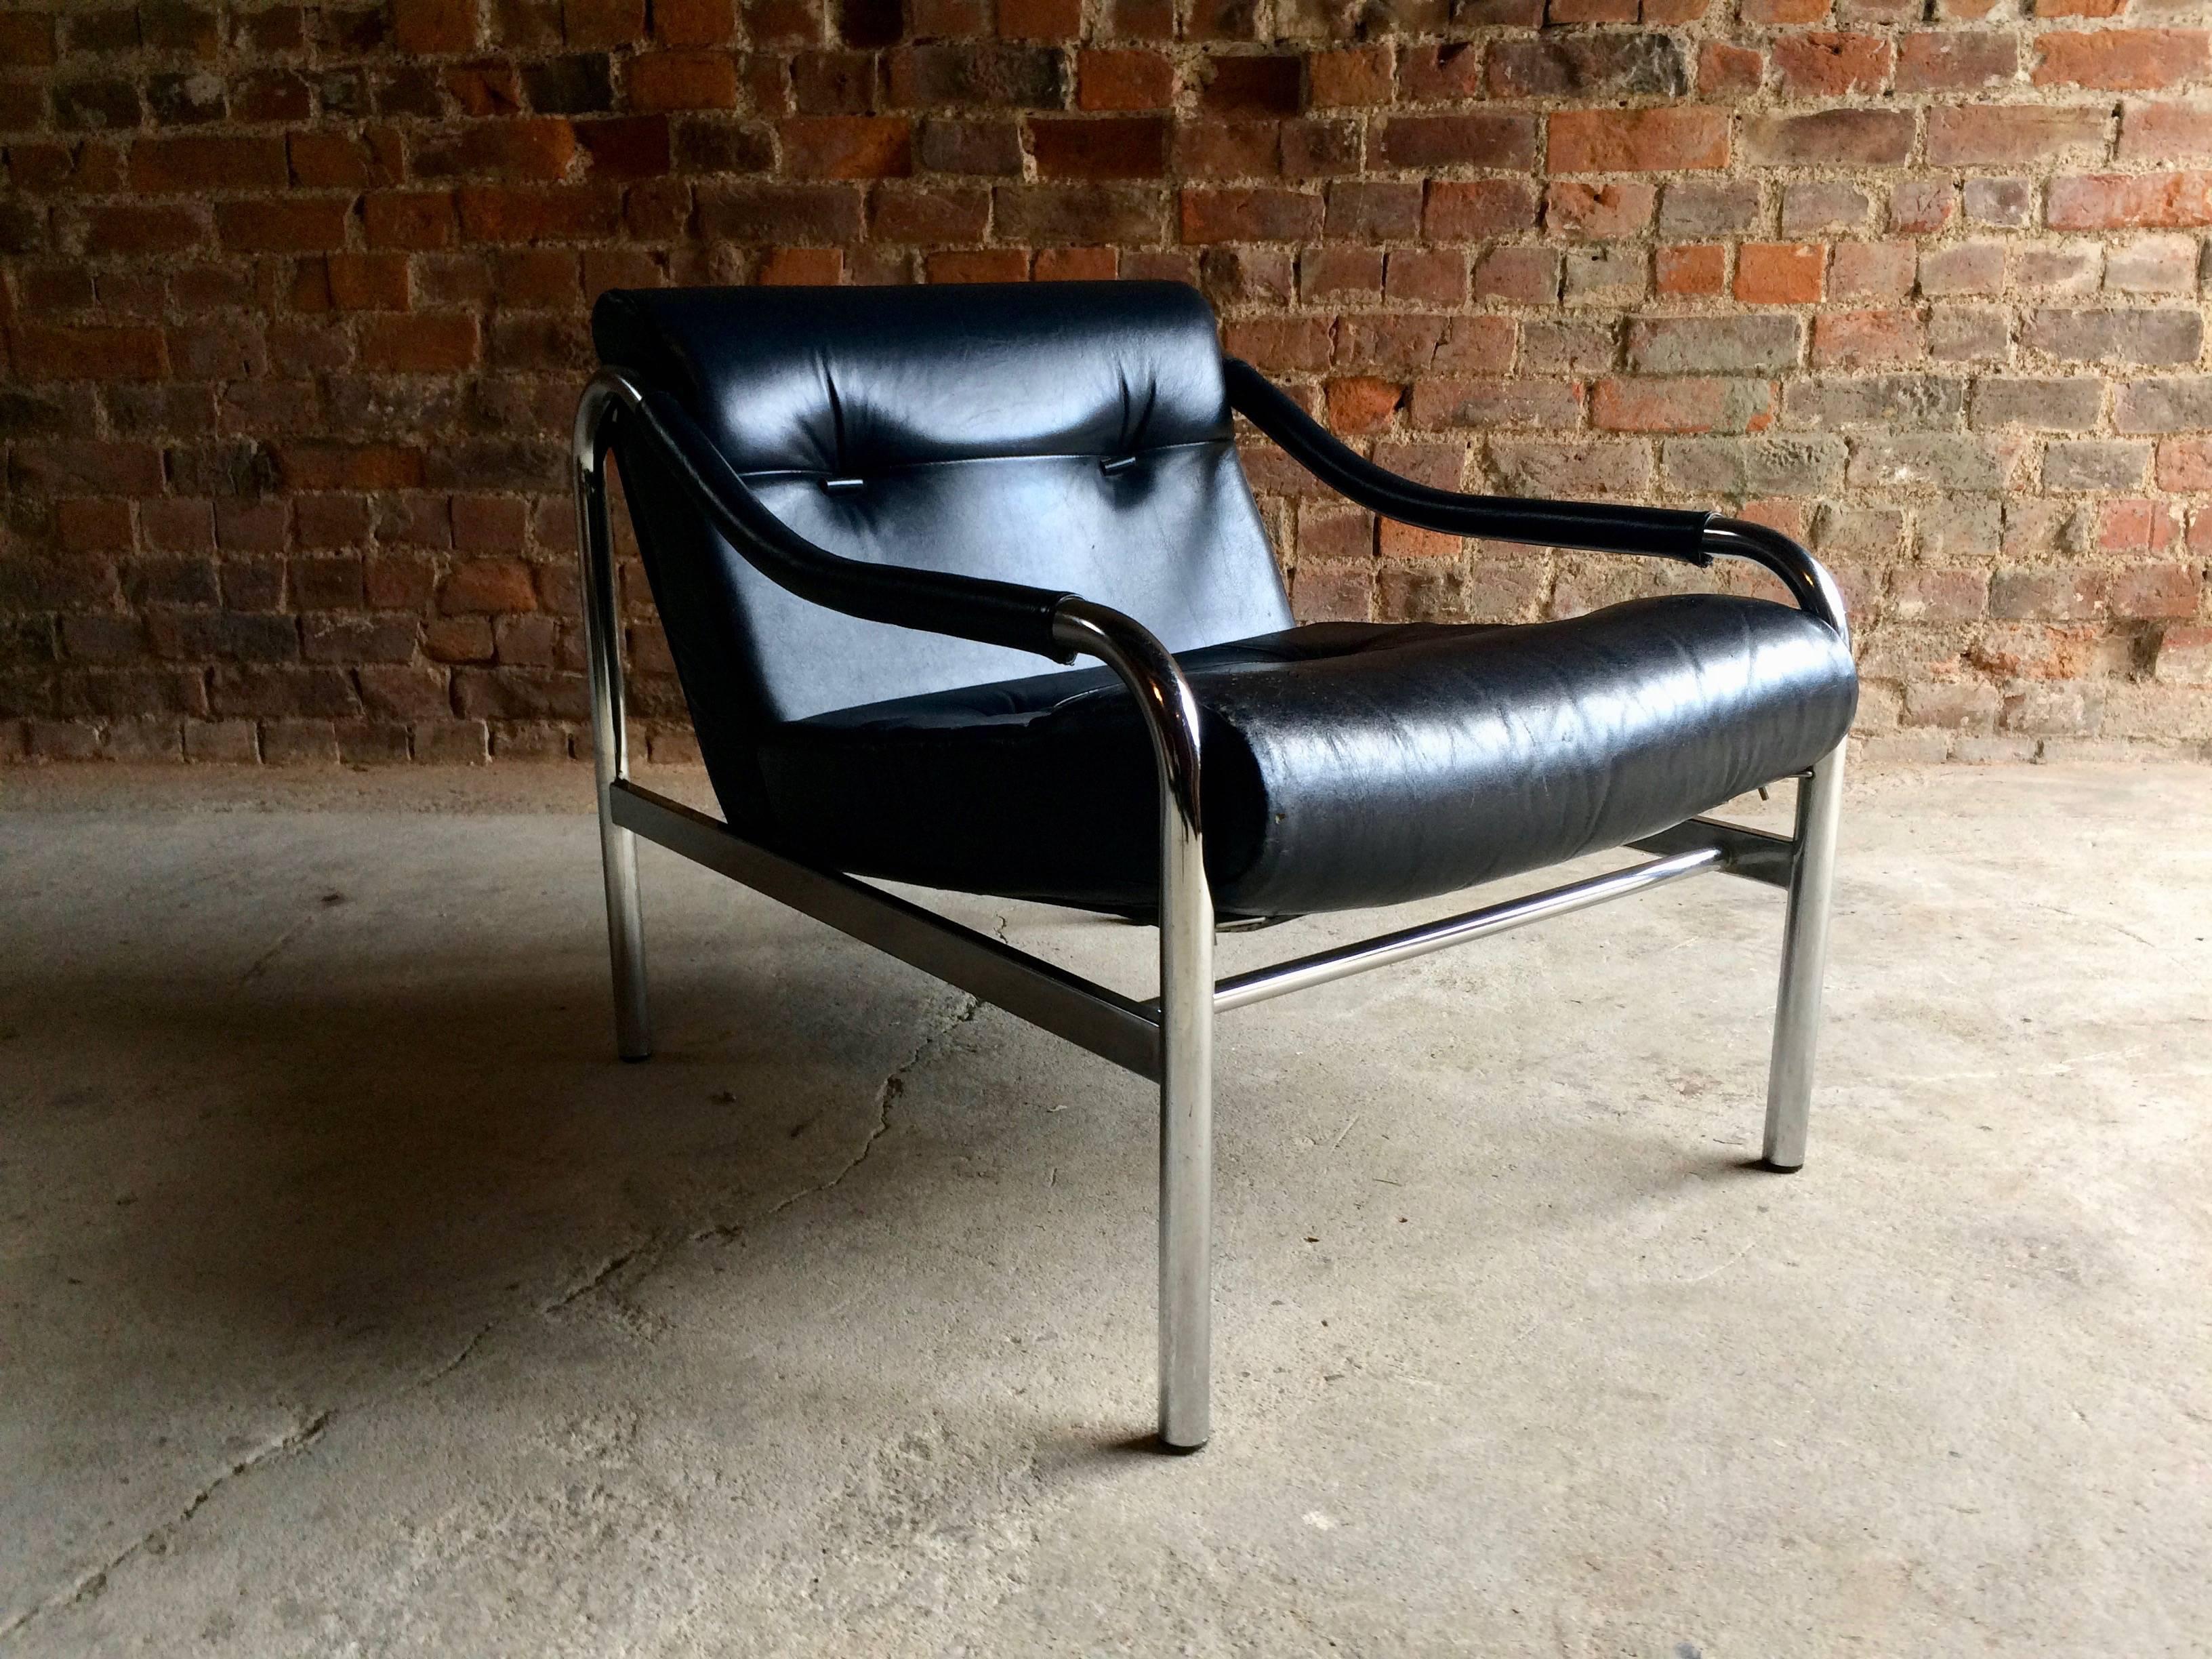 A beautiful 1970s midcentury Pieff of Worcestershire (British) chrome and leather button back armchair, stunning low light chrome tubular frame with removable leather cushions, the chair is in excellent original condition with only light age marks